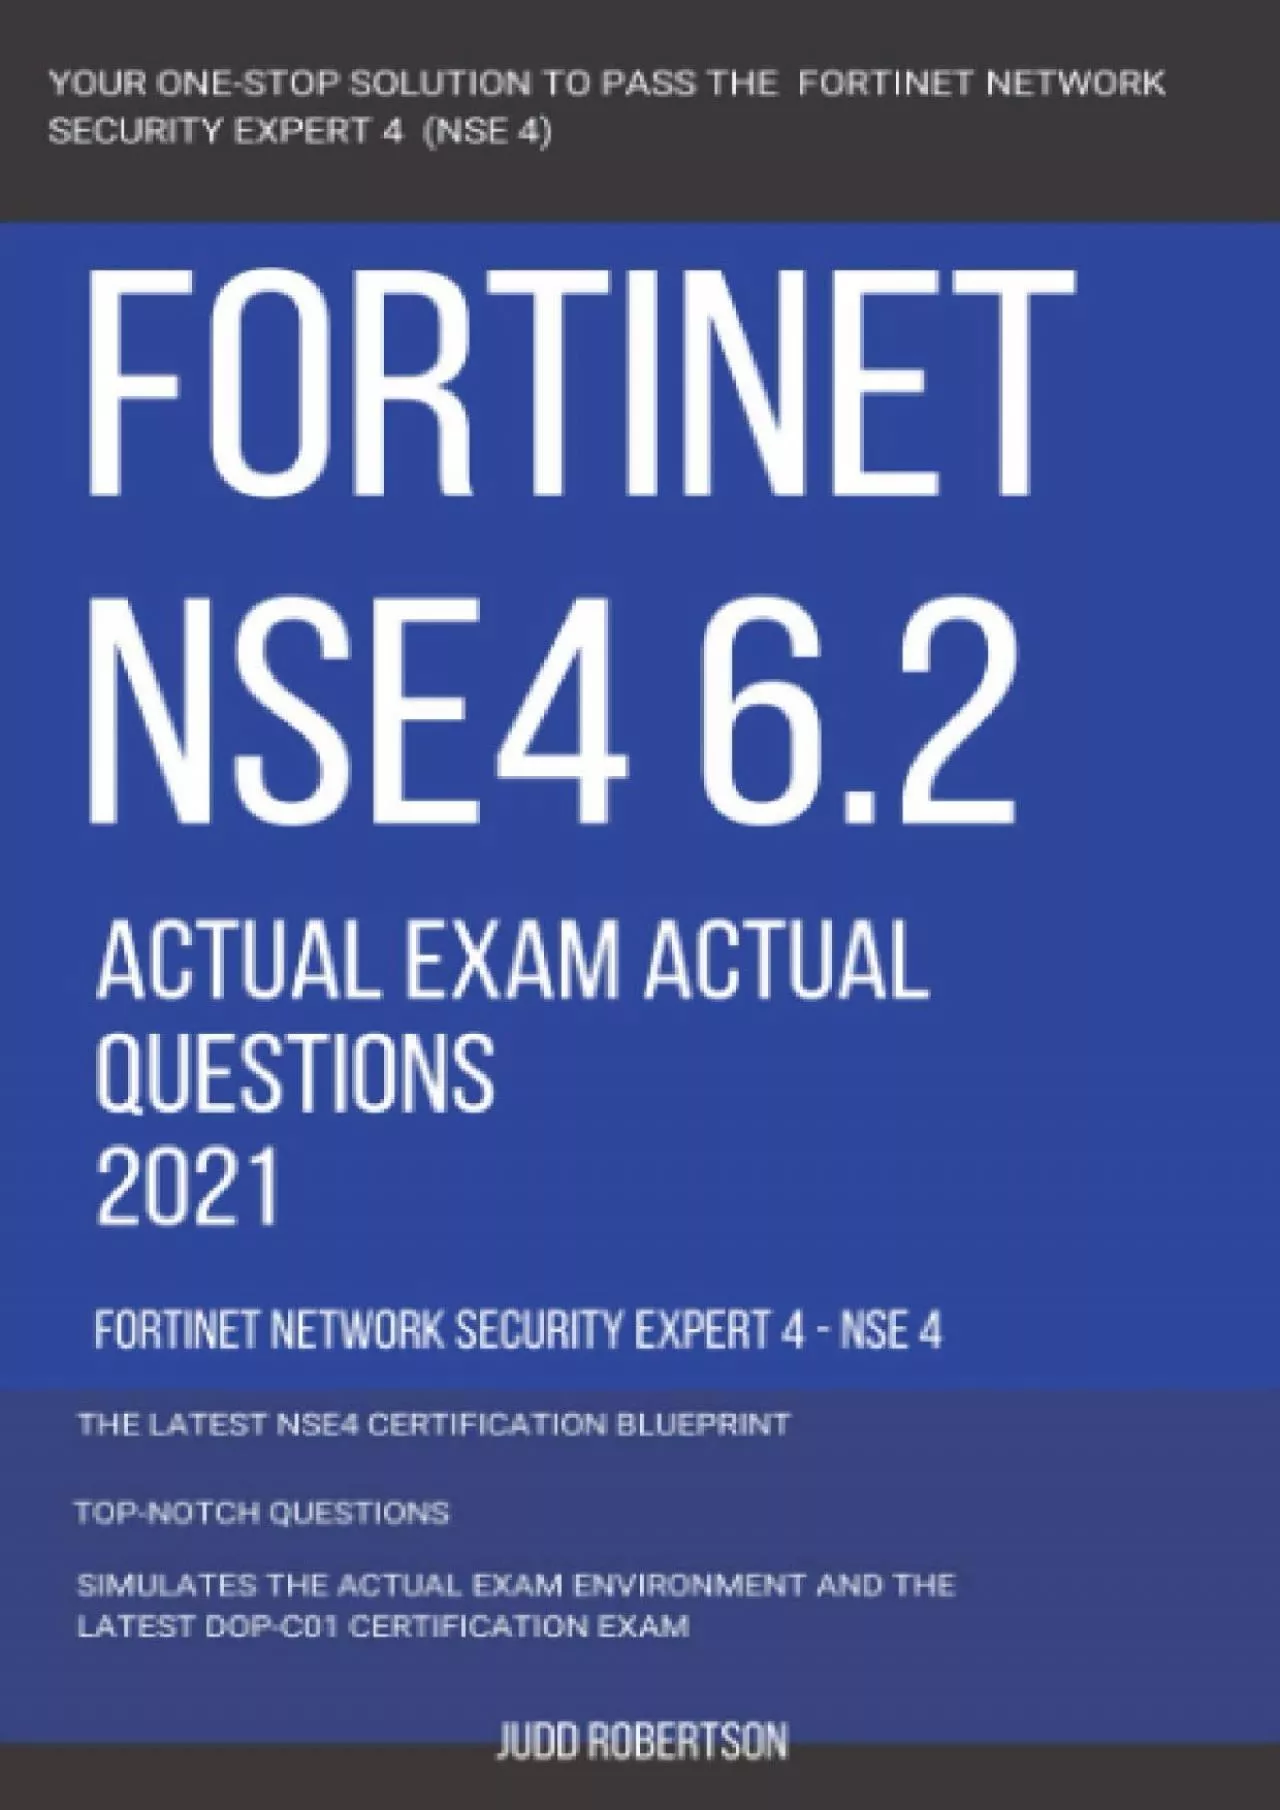 [DOWLOAD]-Fortinet NSE4 6.2 Actual Exam Actual Questions 2021 Fortinet Network Security